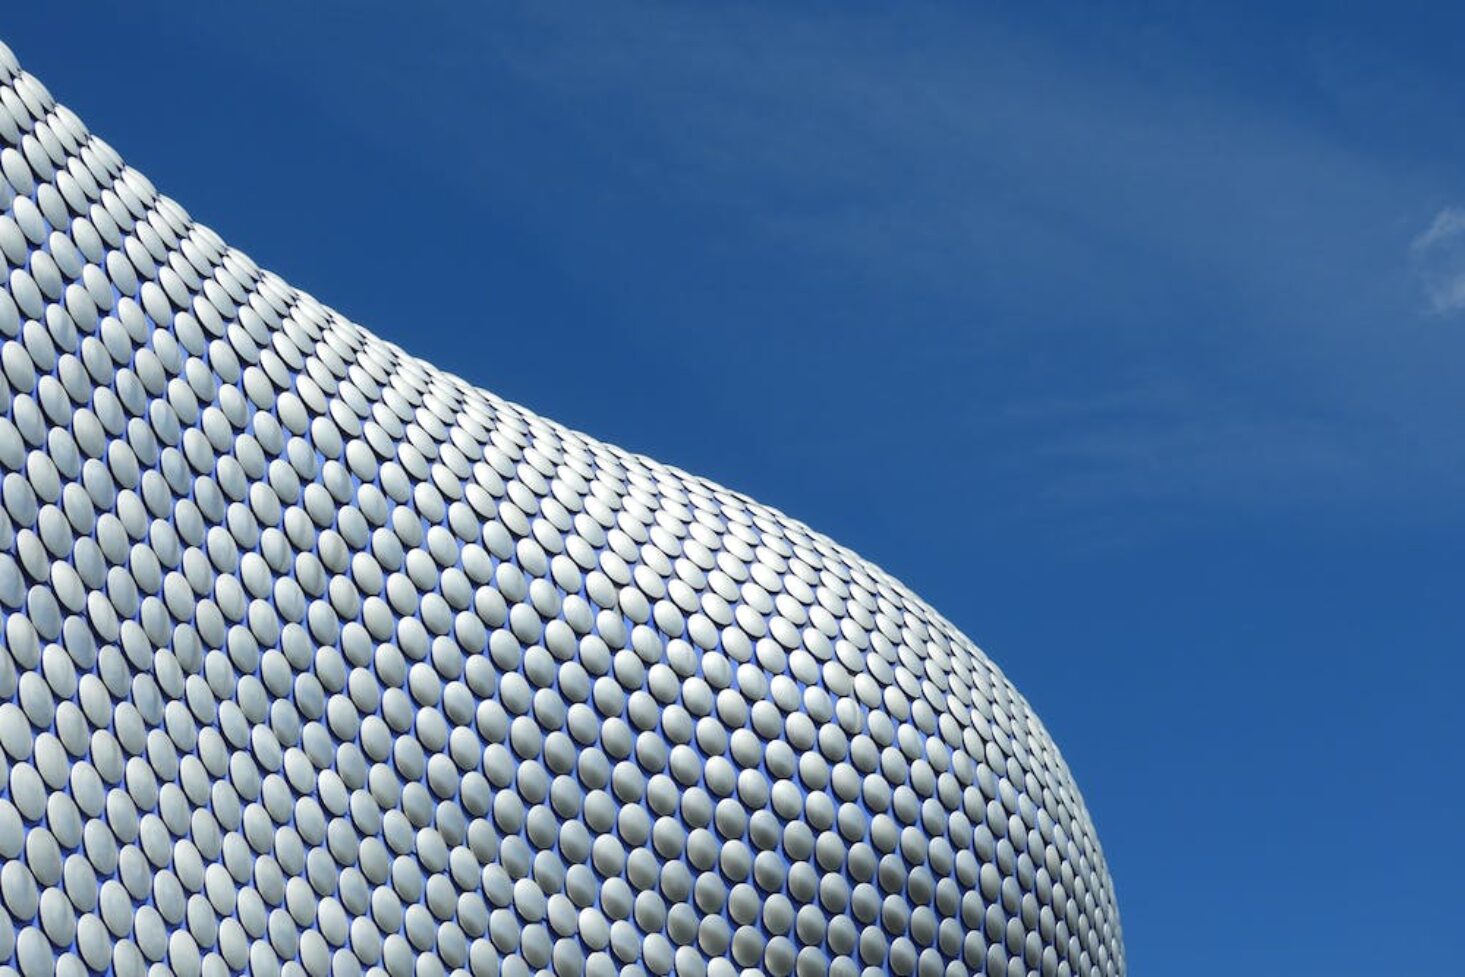 The Best Birmingham Attractions for Photography Lovers